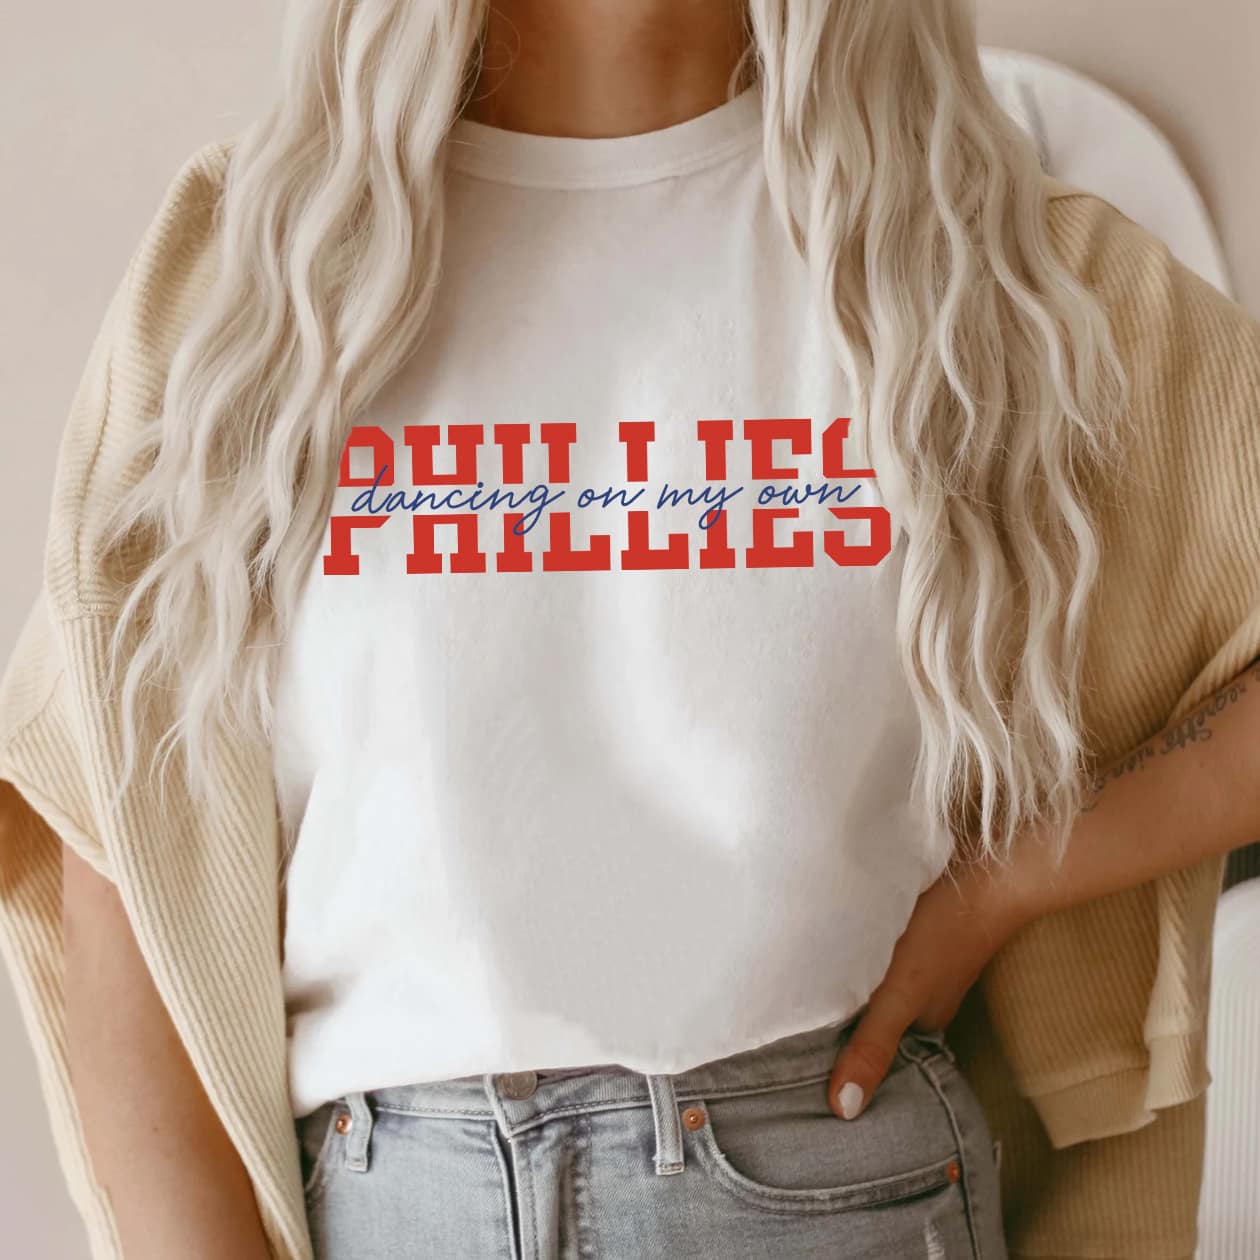 Phillies Dancing On My Own Sweatshirt, Light Blue Phillies Shirt, Gifts for  Phillies Fans - Happy Place for Music Lovers